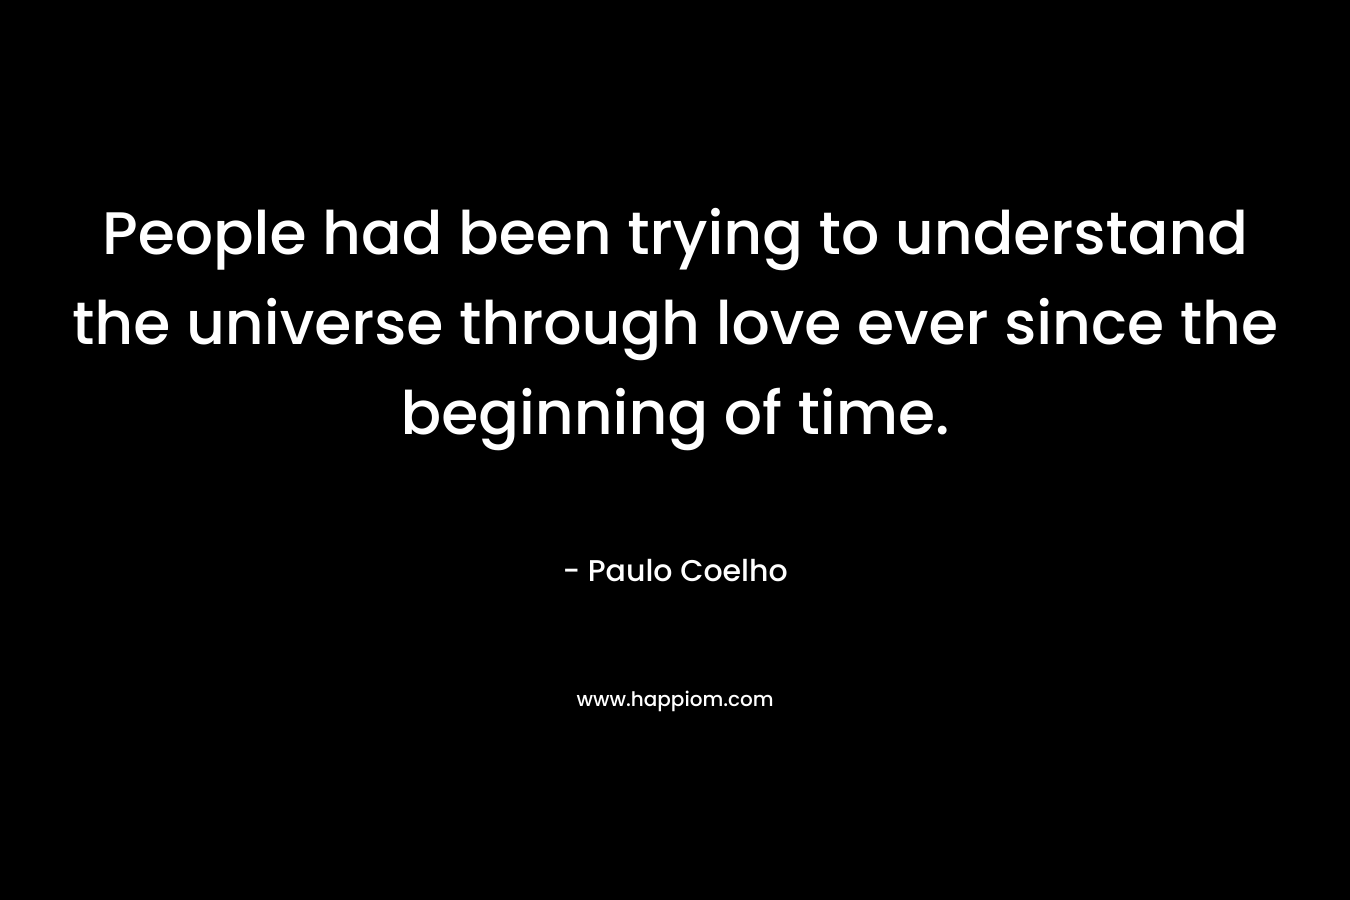 People had been trying to understand the universe through love ever since the beginning of time.